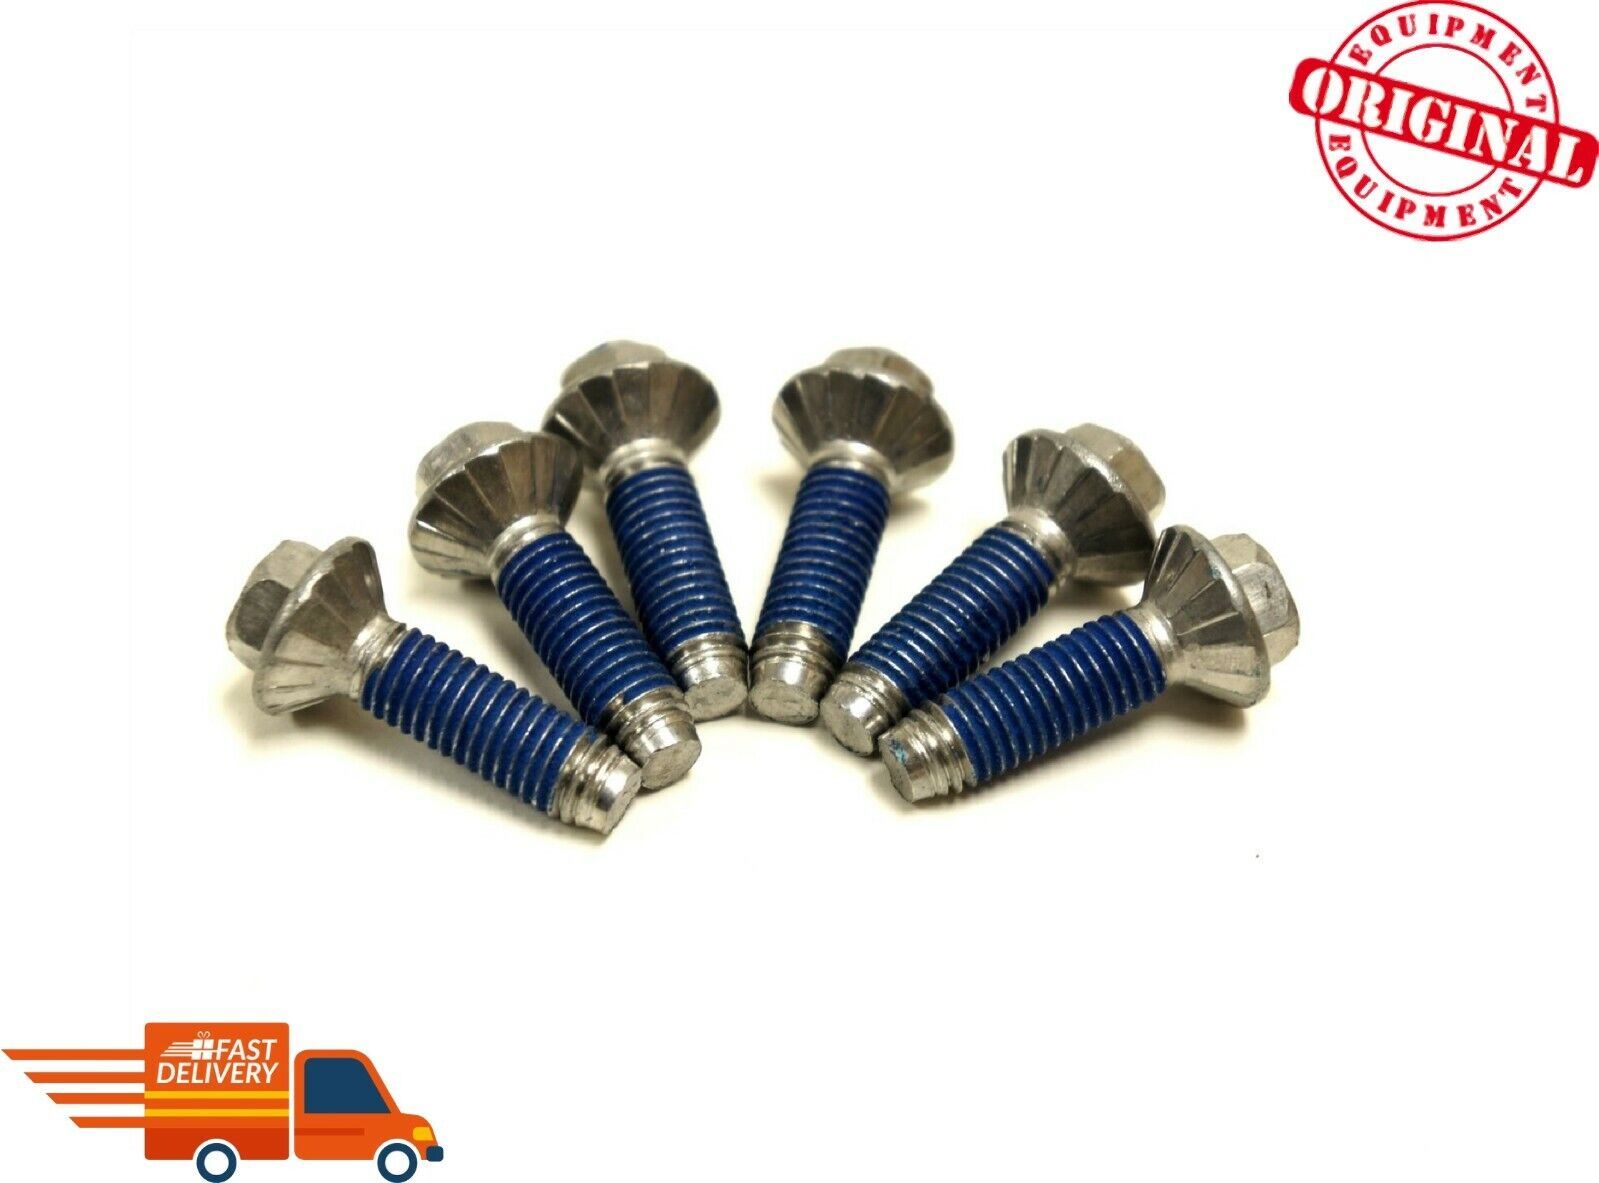 New OEM Genuine 6 Pack Samsung DC60-40137A Spider Hex Bolts (6 Pcs)